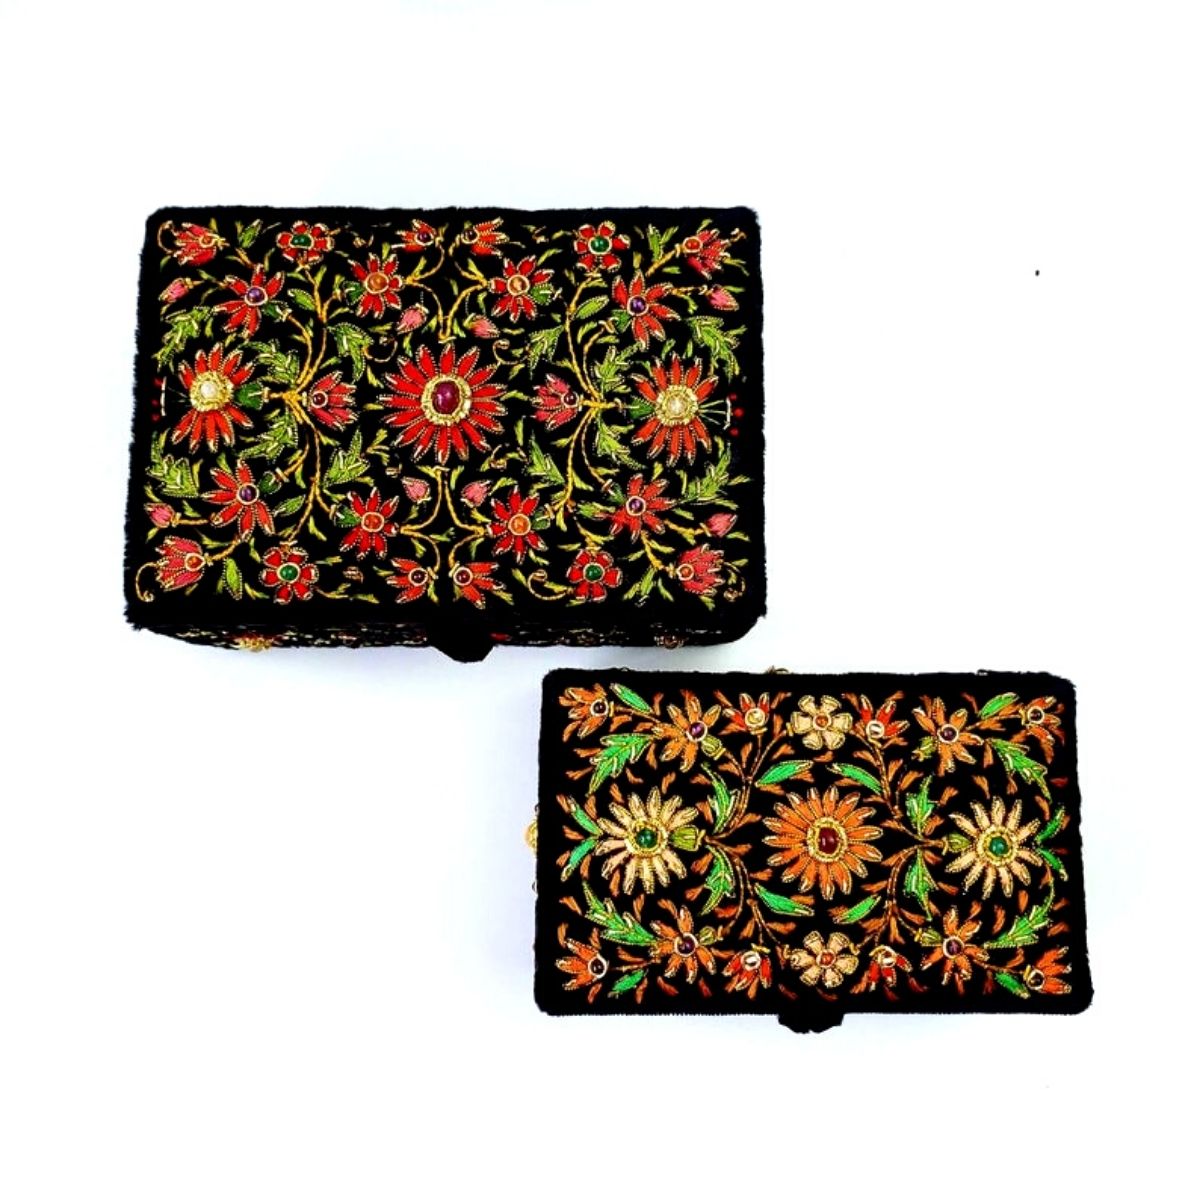 Two hand embroidered black velvet memory boxes, one red flowers, the other orange flowers., inlaid with semi precious gemstones. 